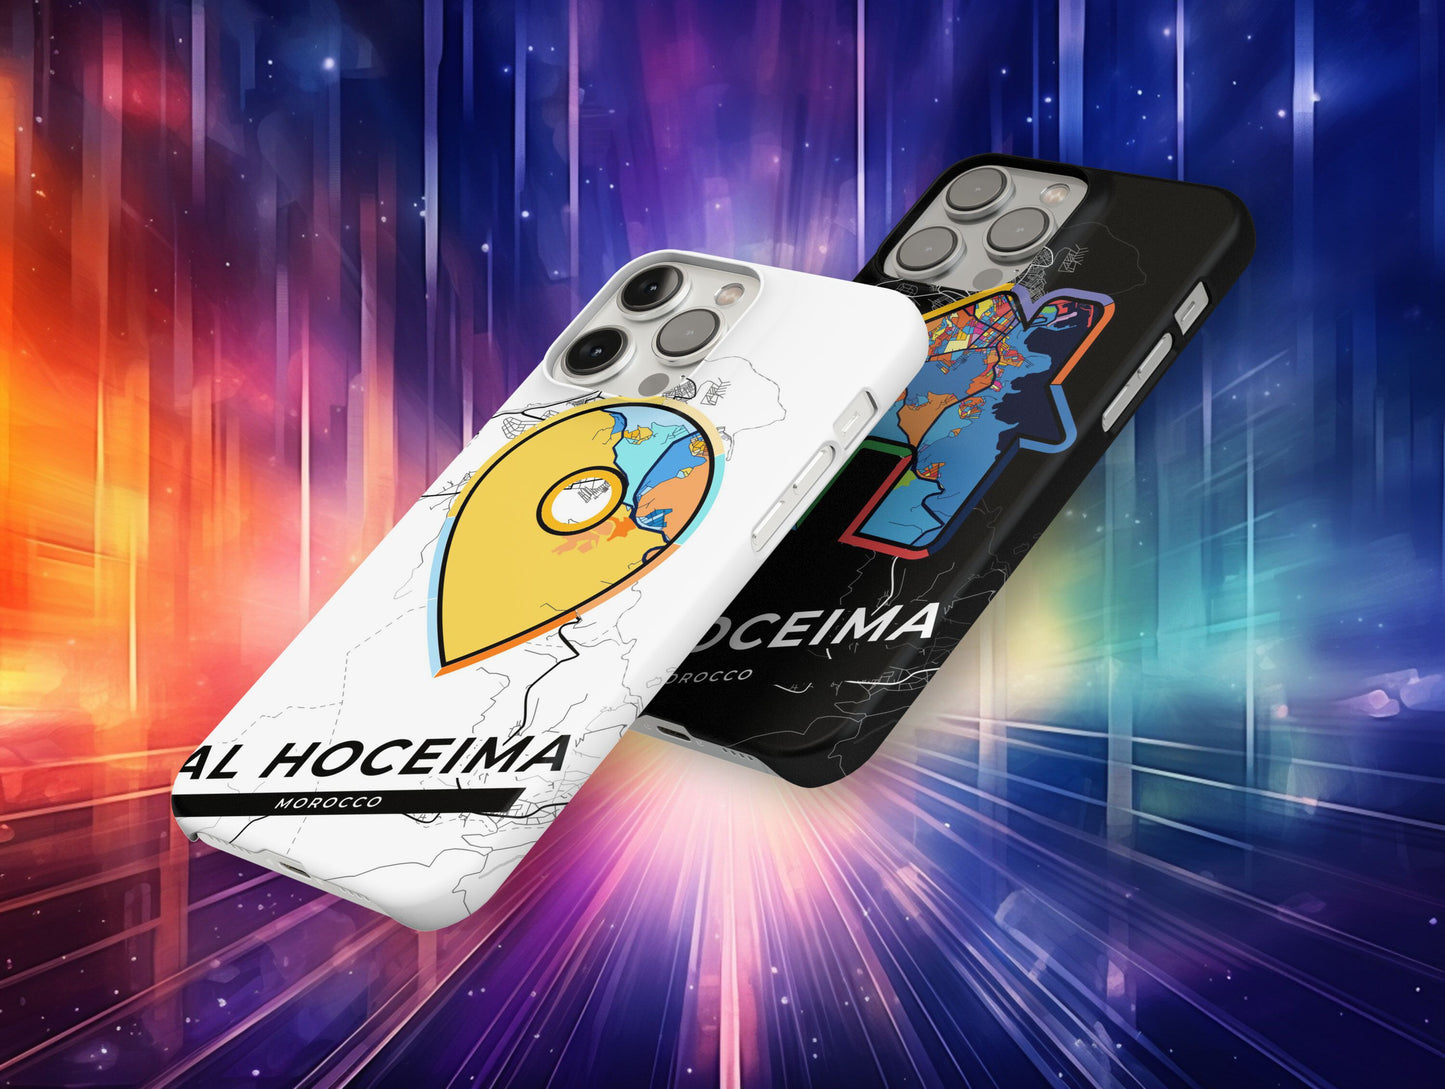 Al Hoceima Morocco slim phone case with colorful icon. Birthday, wedding or housewarming gift. Couple match cases.